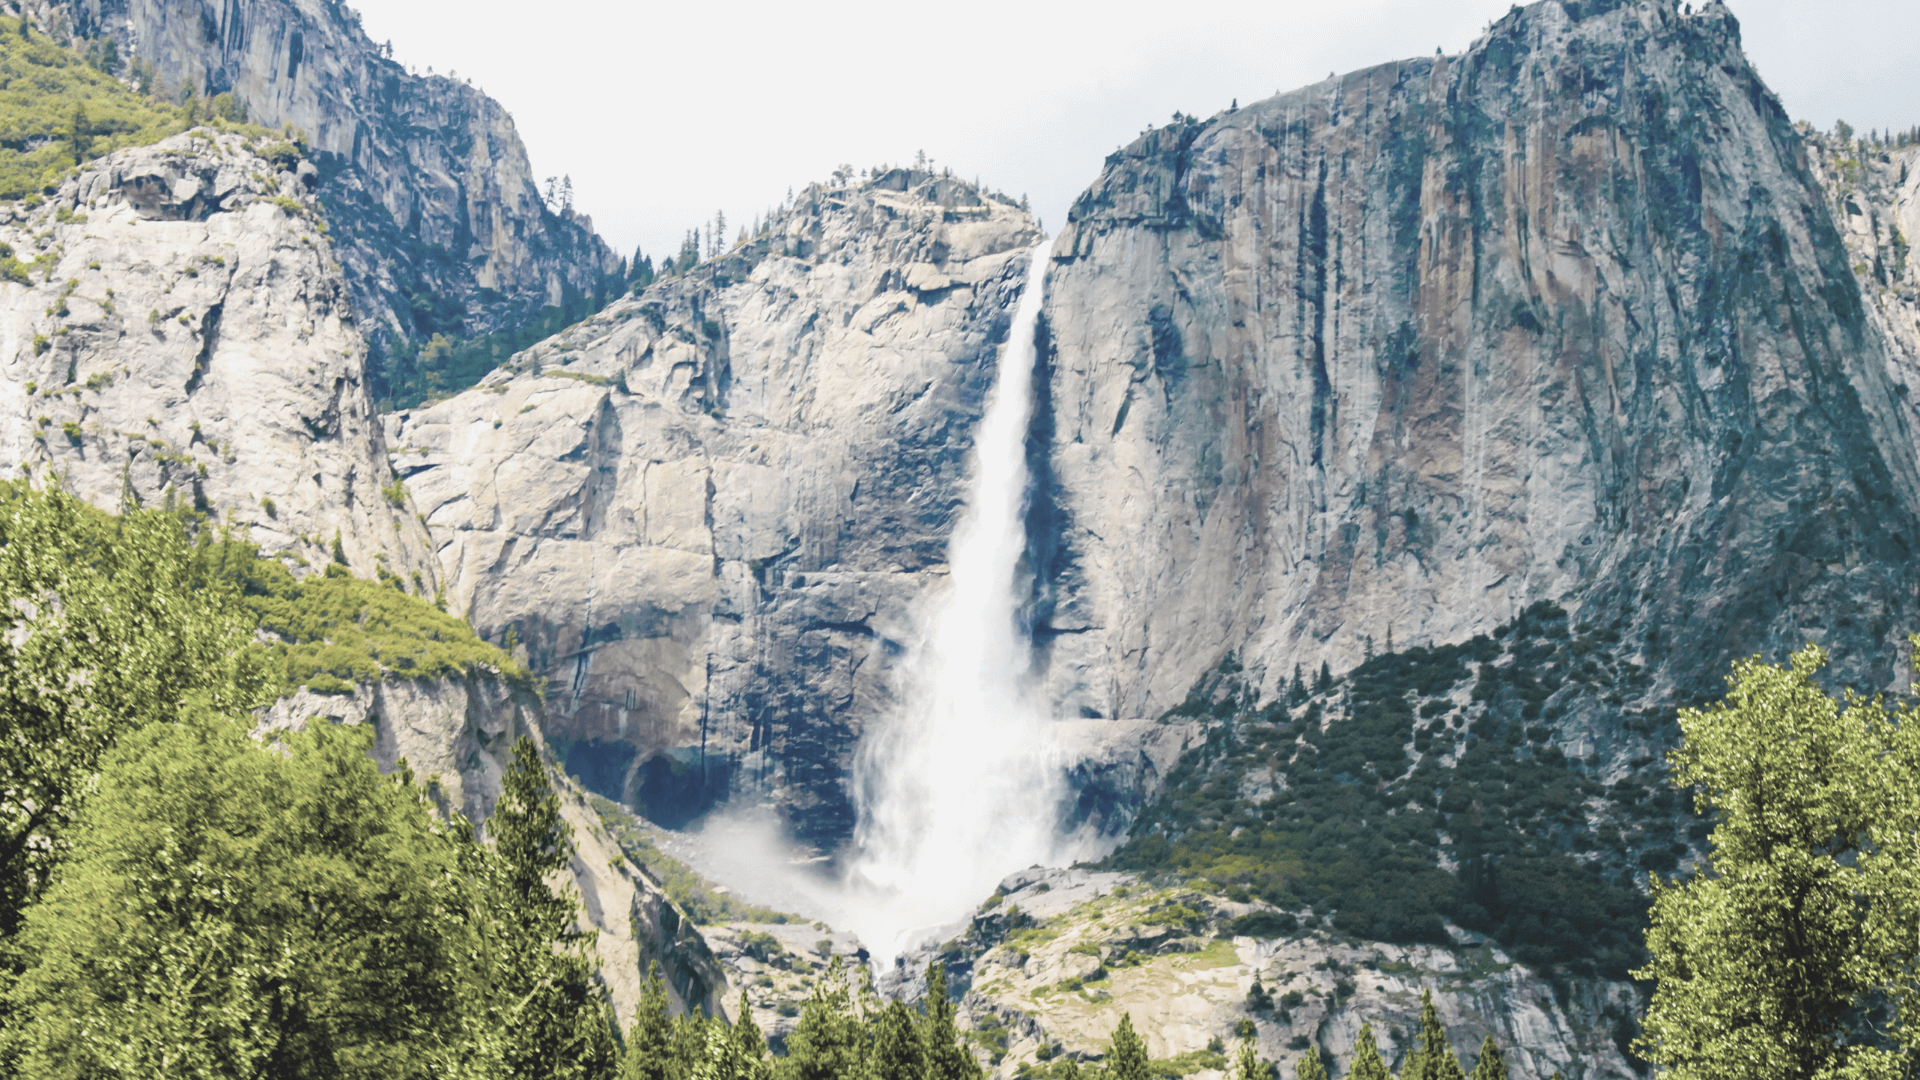 Top 5 Reasons to go to Yosemite National Park